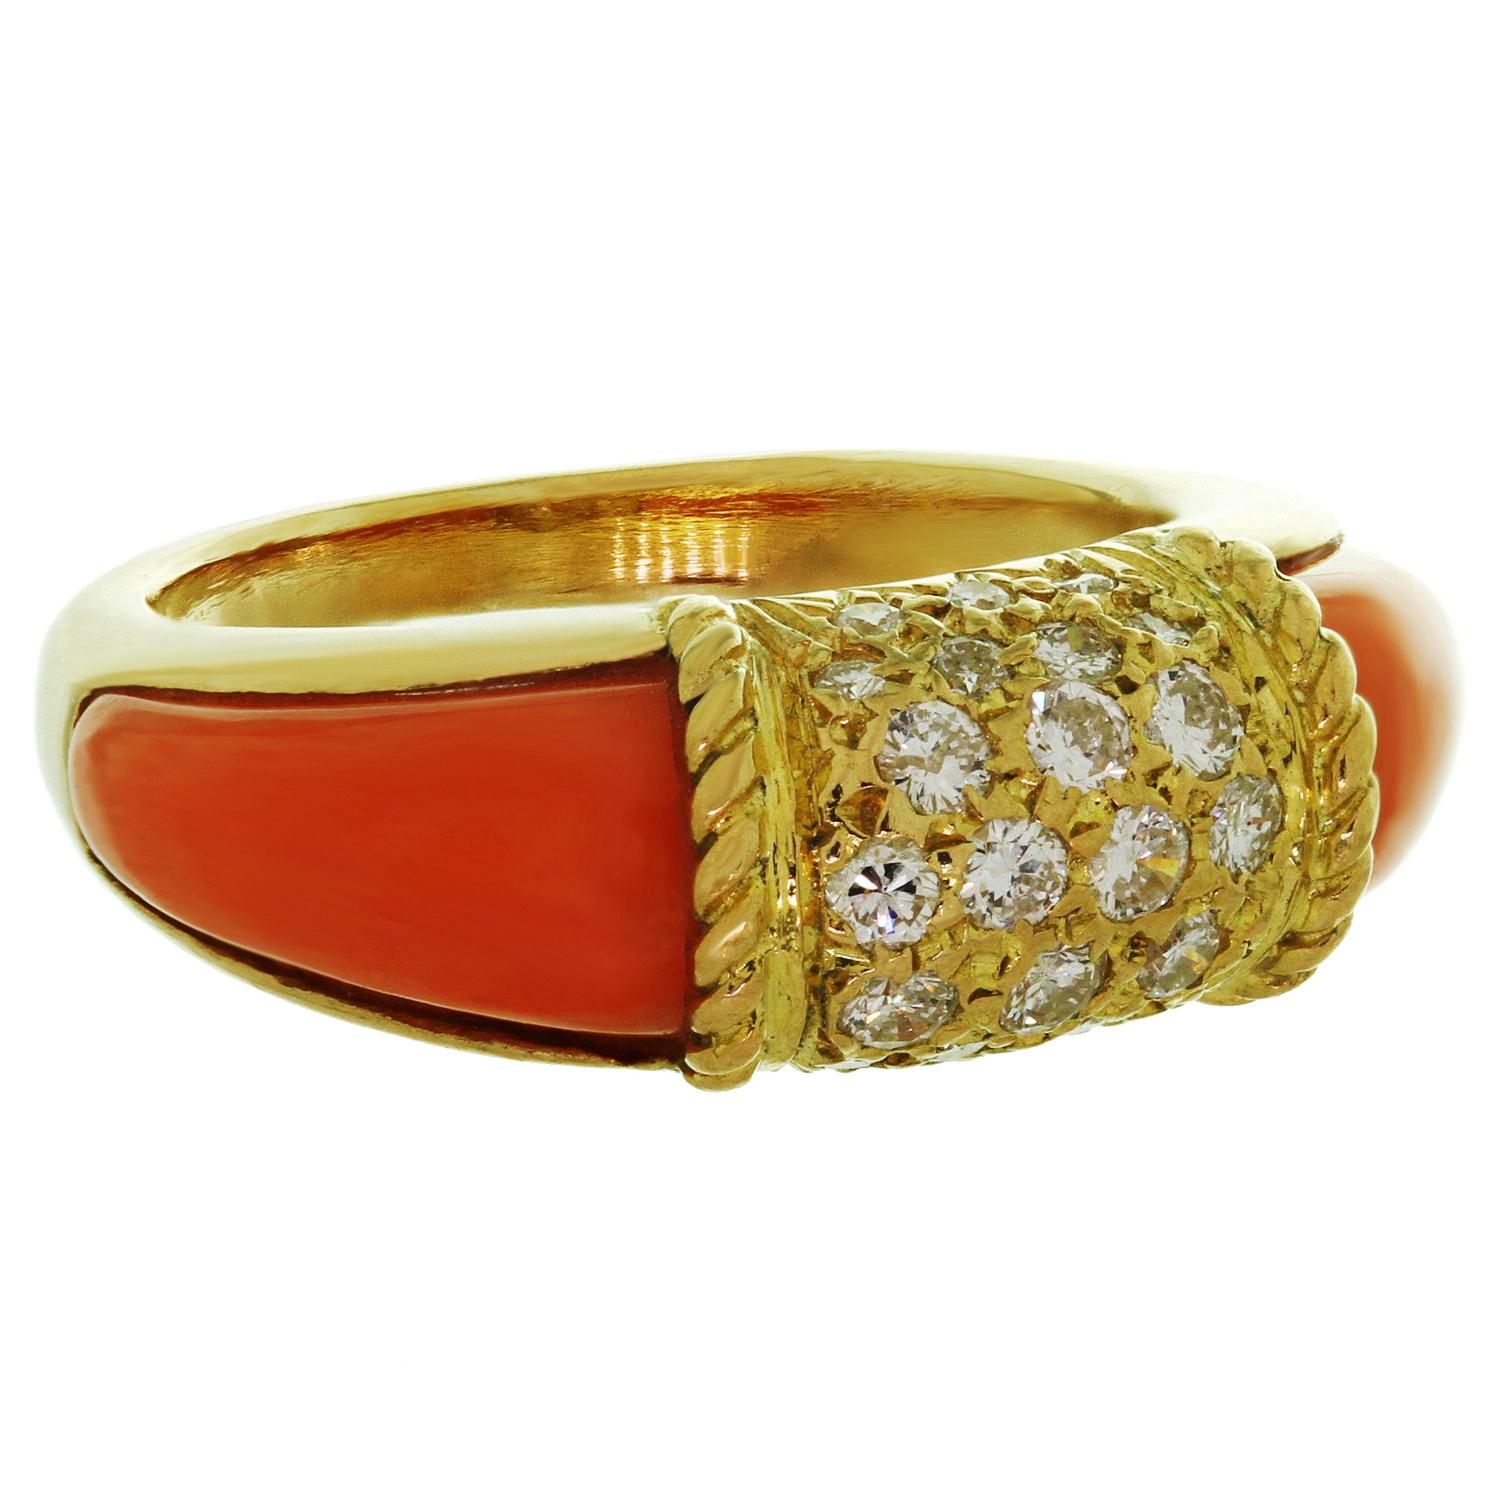 coral and diamond ring